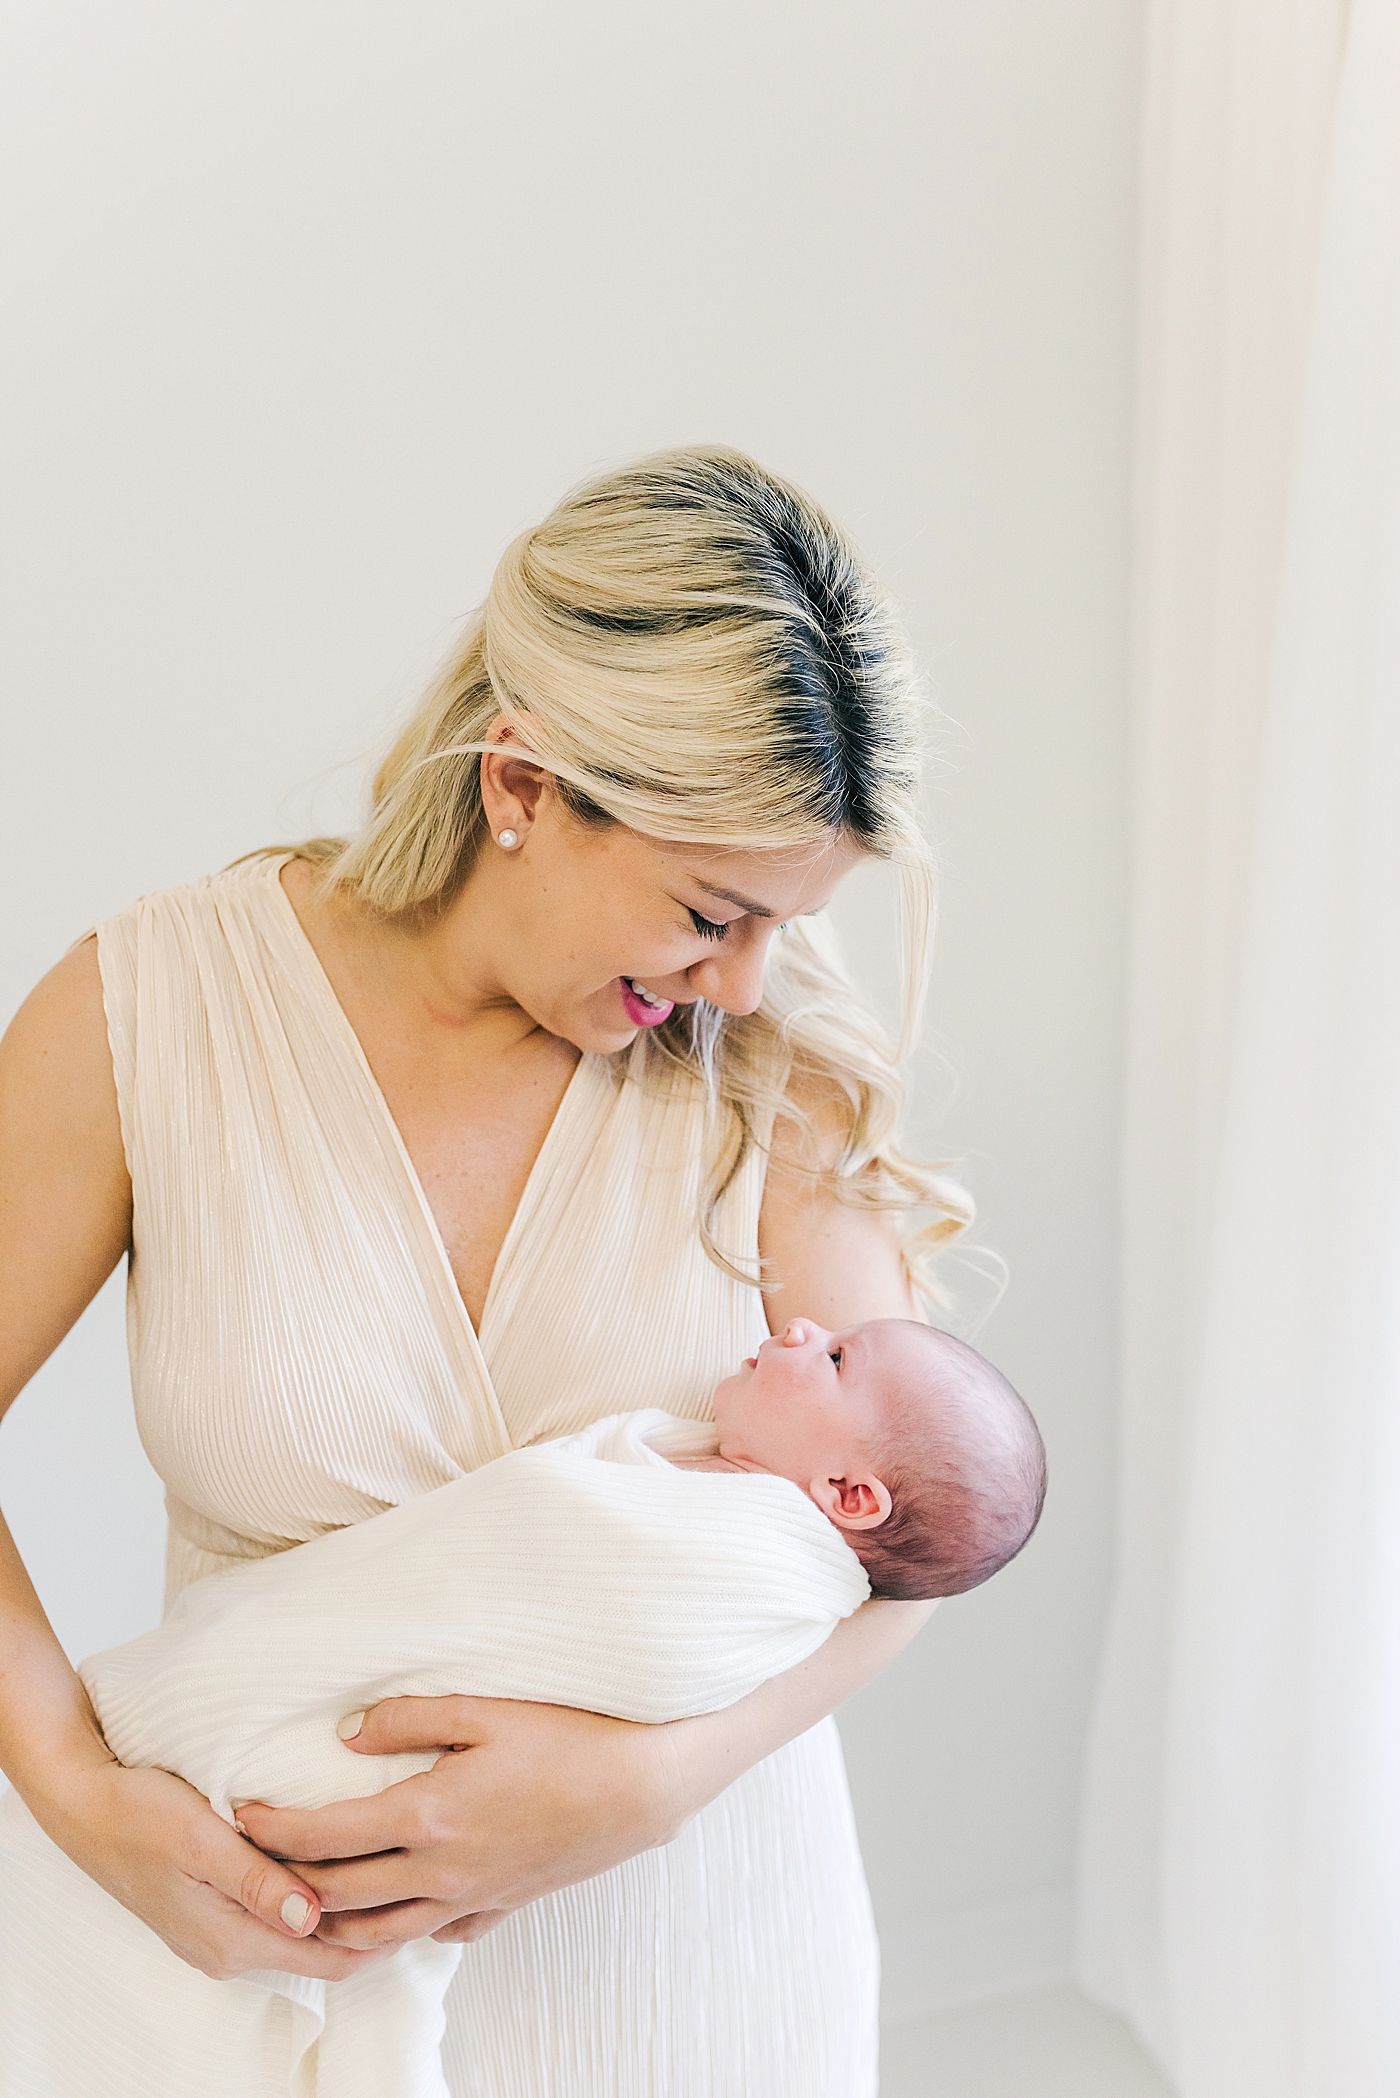 New mom holding her newborn baby | Photo by Anna Wisjo Photography